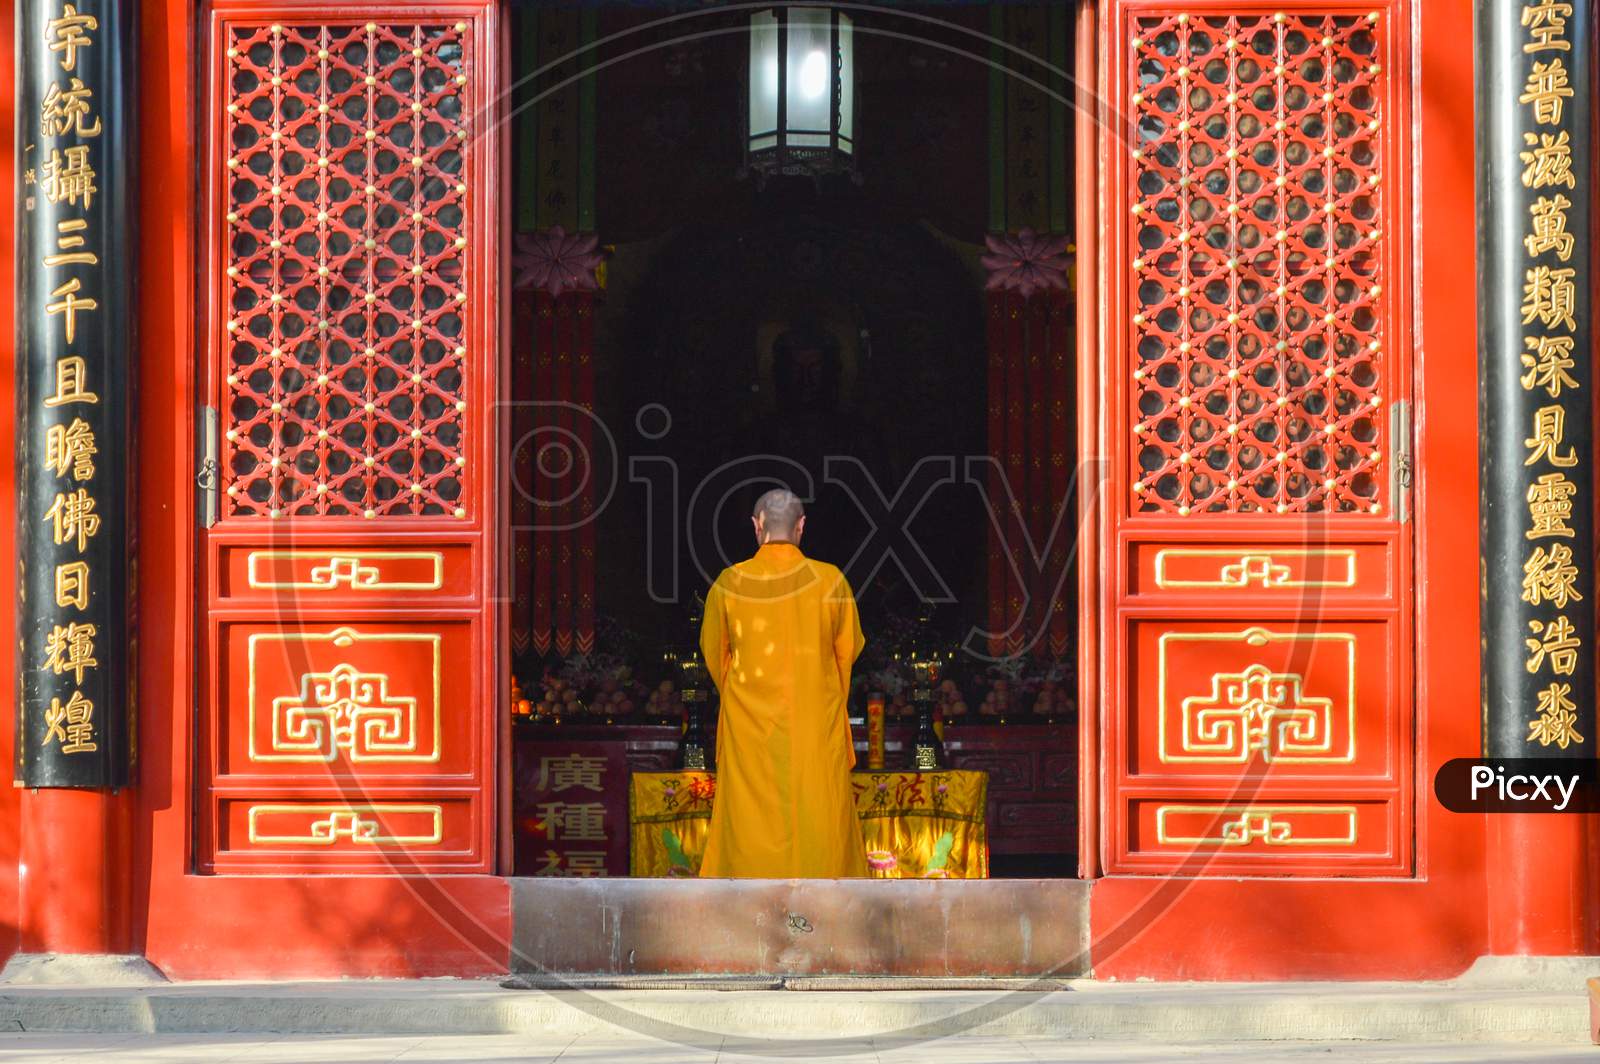 Buddhist Monk Performing Ritual At Fayuan Temple In Beijing, China